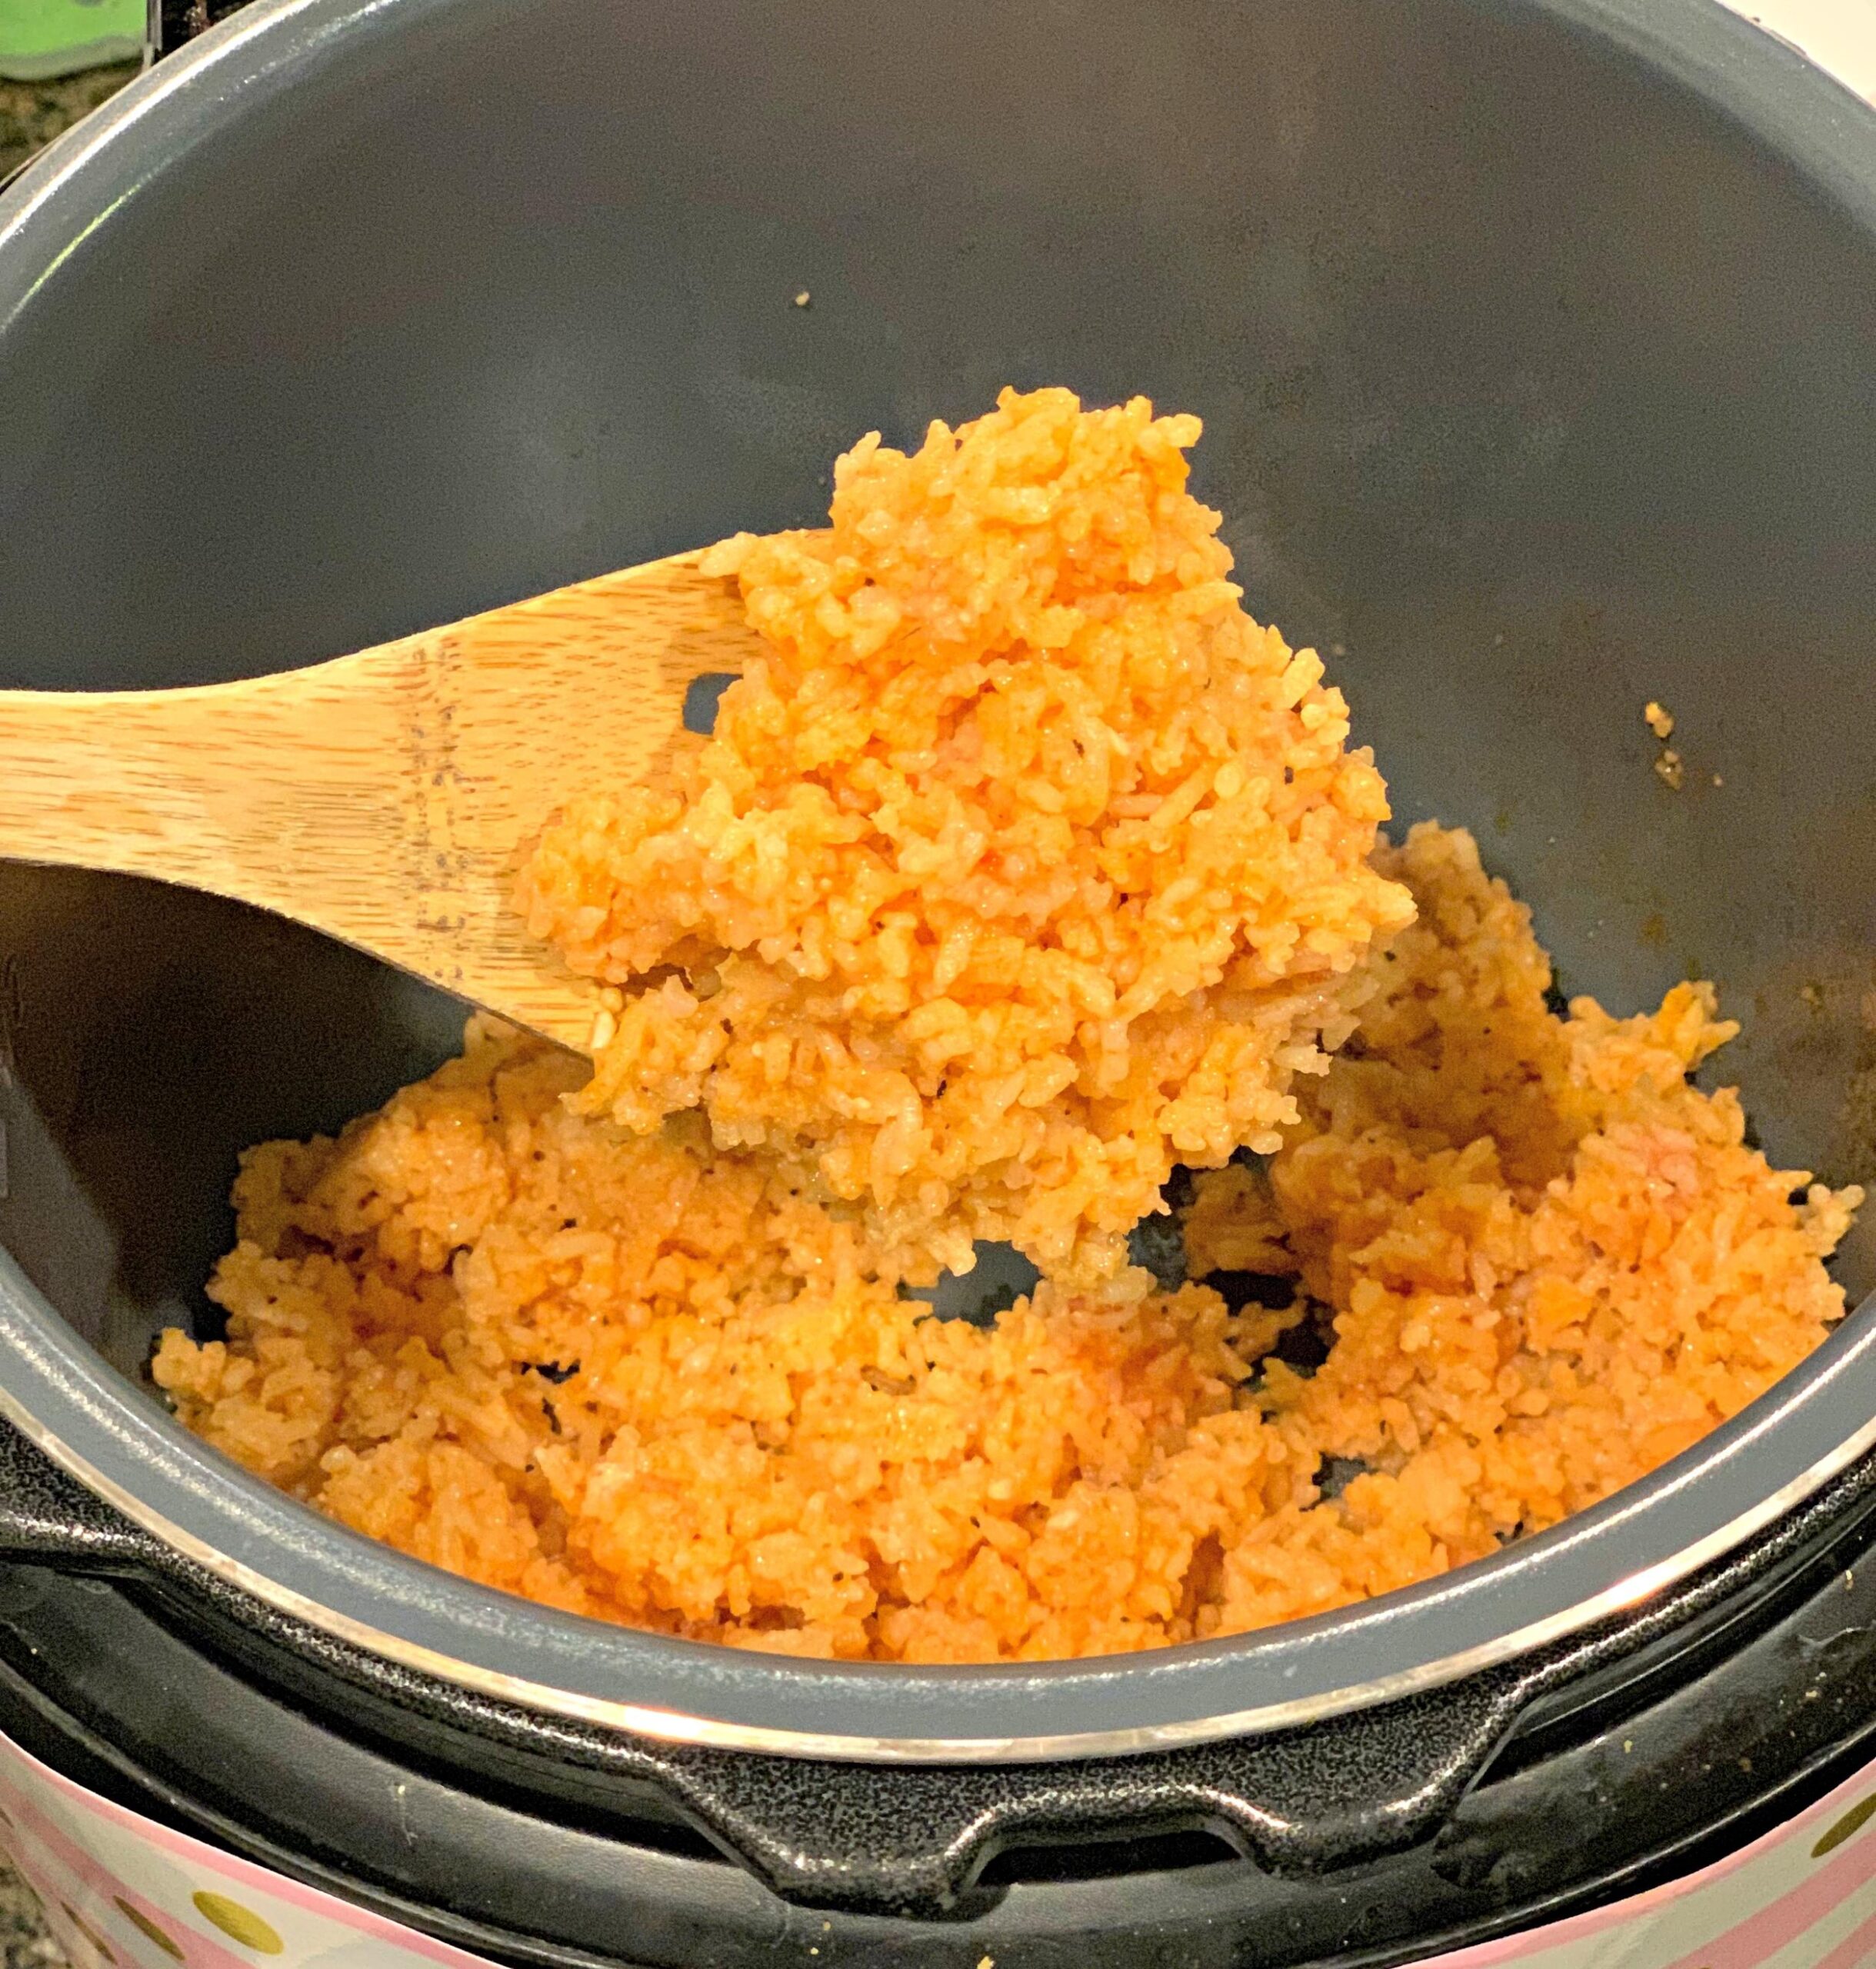  The Instant Pot makes cooking this rice a breeze.